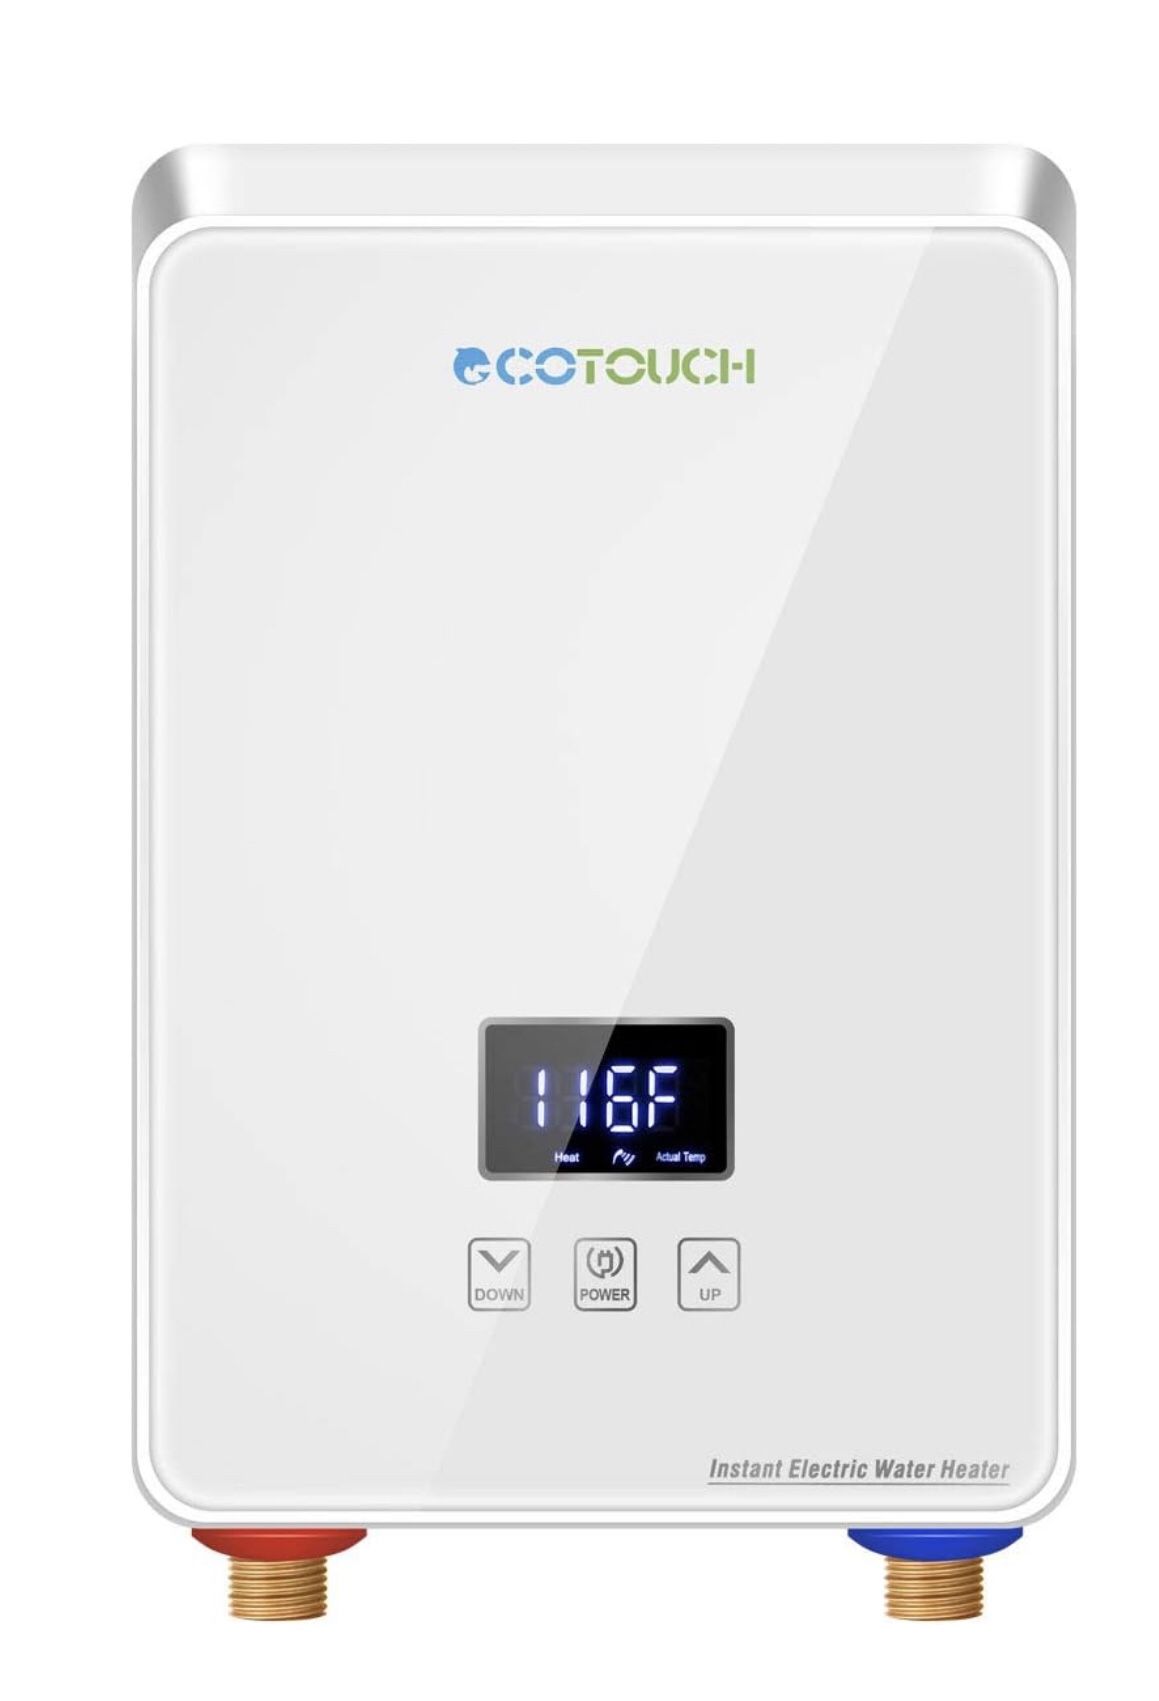 NEW! Tankless Water Heater 5.5kw 240V, Point-of-Use Digital Display,Electric Instant Hot Water